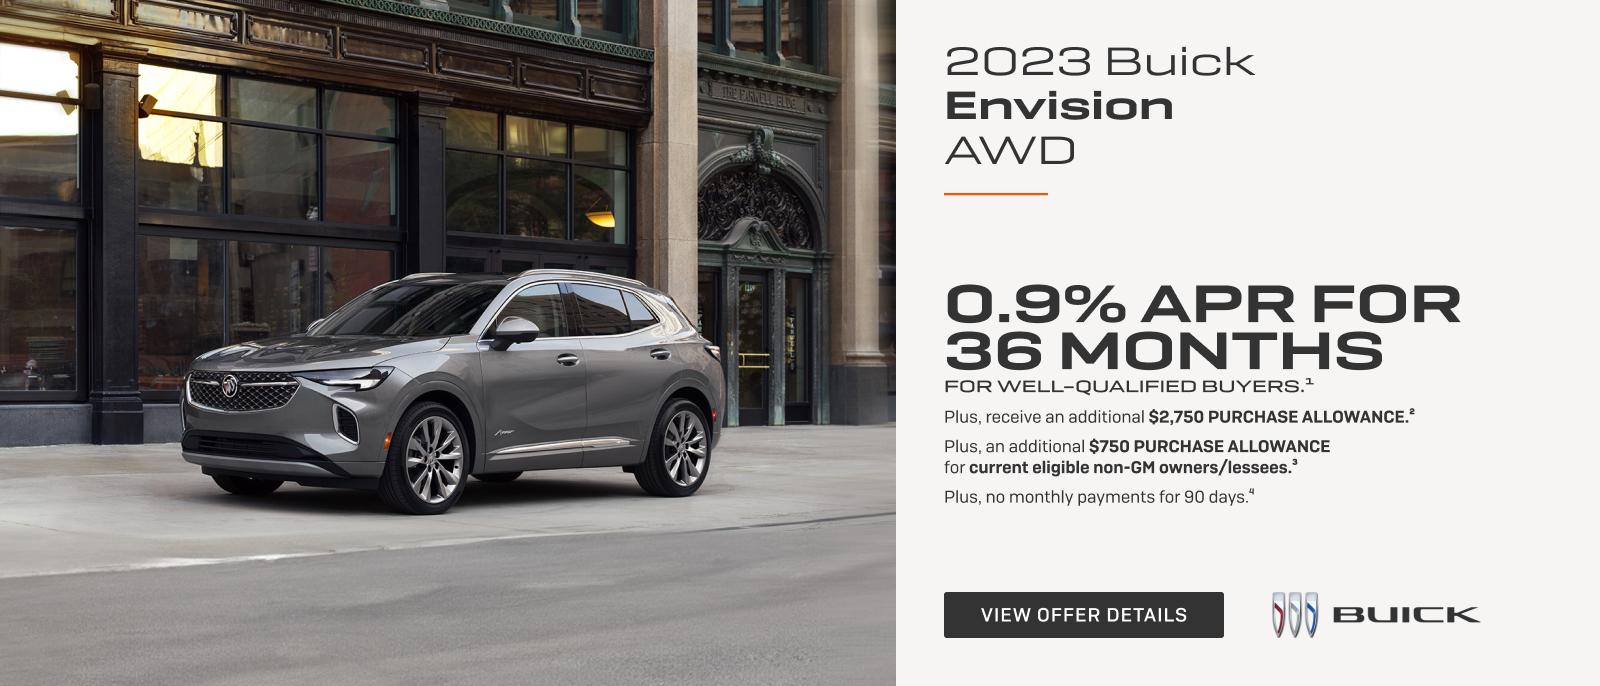 0.9% APR FOR 36 MONTHS 
FOR WELL-QUALIFIED BUYERS.1

Plus, receive an additional $2,750 PURCHASE ALLOWANCE.2

Plus, an additional $750 PURCHASE ALLOWANCE for current eligible non-GM owners/lessees.3

Plus, no monthly payments for 90 days.4